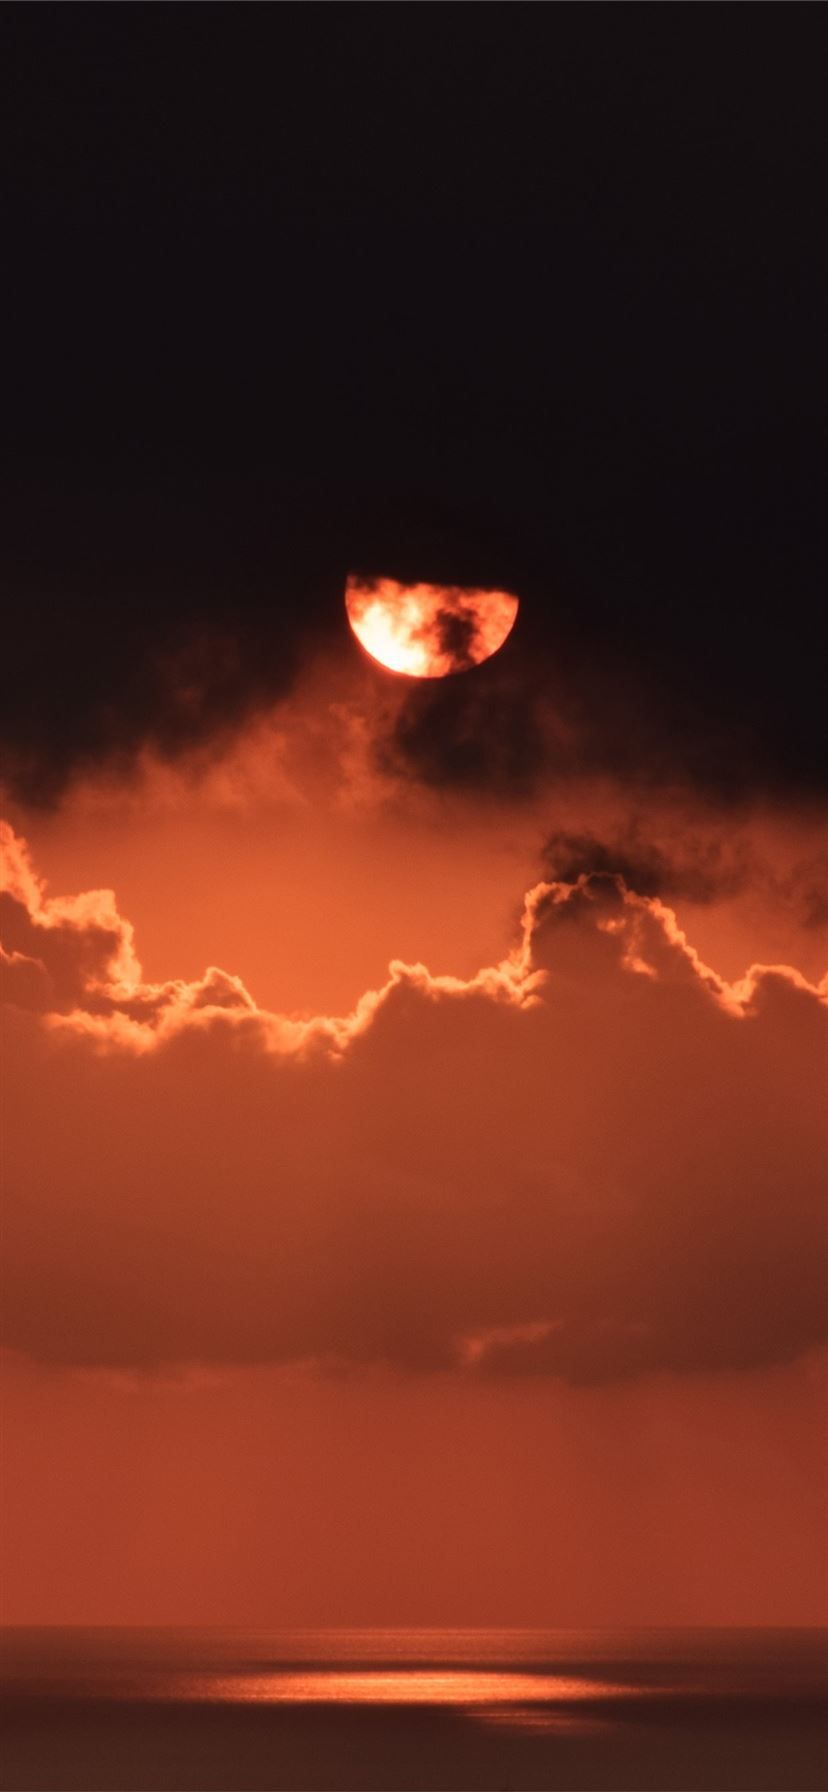 IPhone wallpaper of a red moon rising over the sea with clouds - Sunset, dark orange